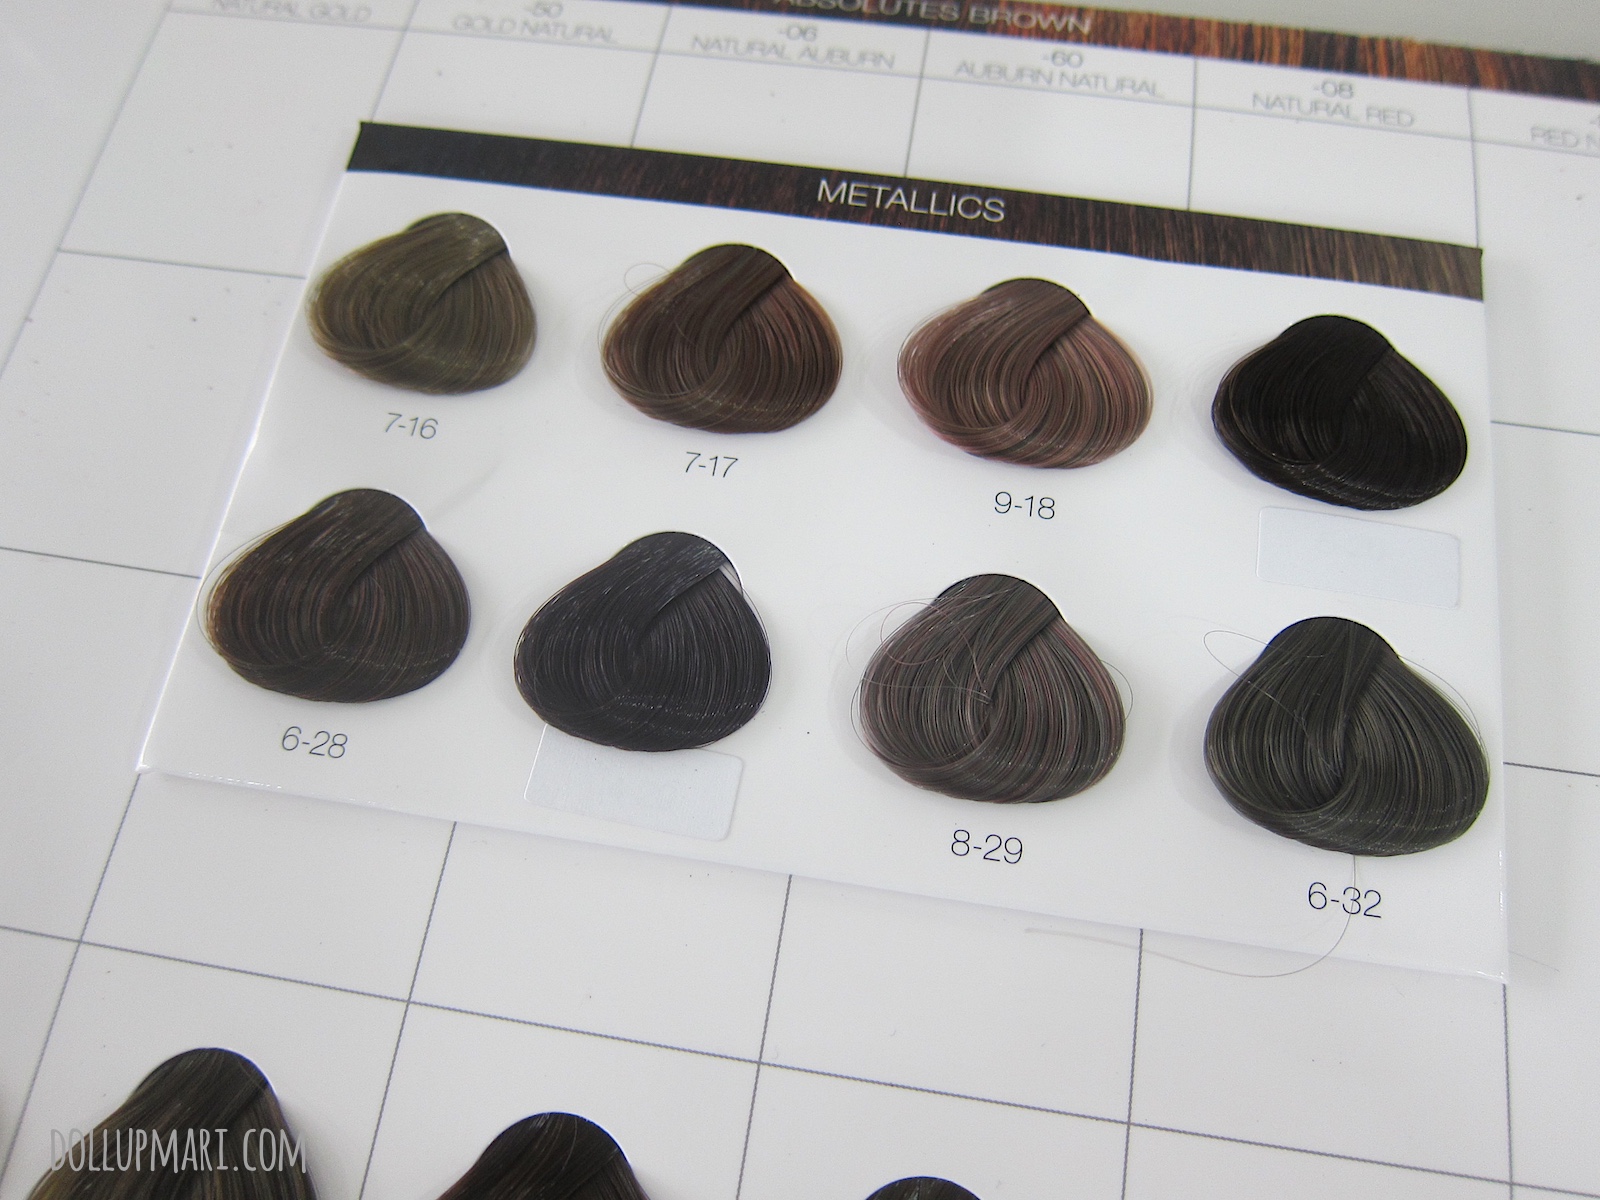 Schwarzkopf Color Chart for shades 7-16, 7-17, 9-18, 6-28, 8-29, 6-32